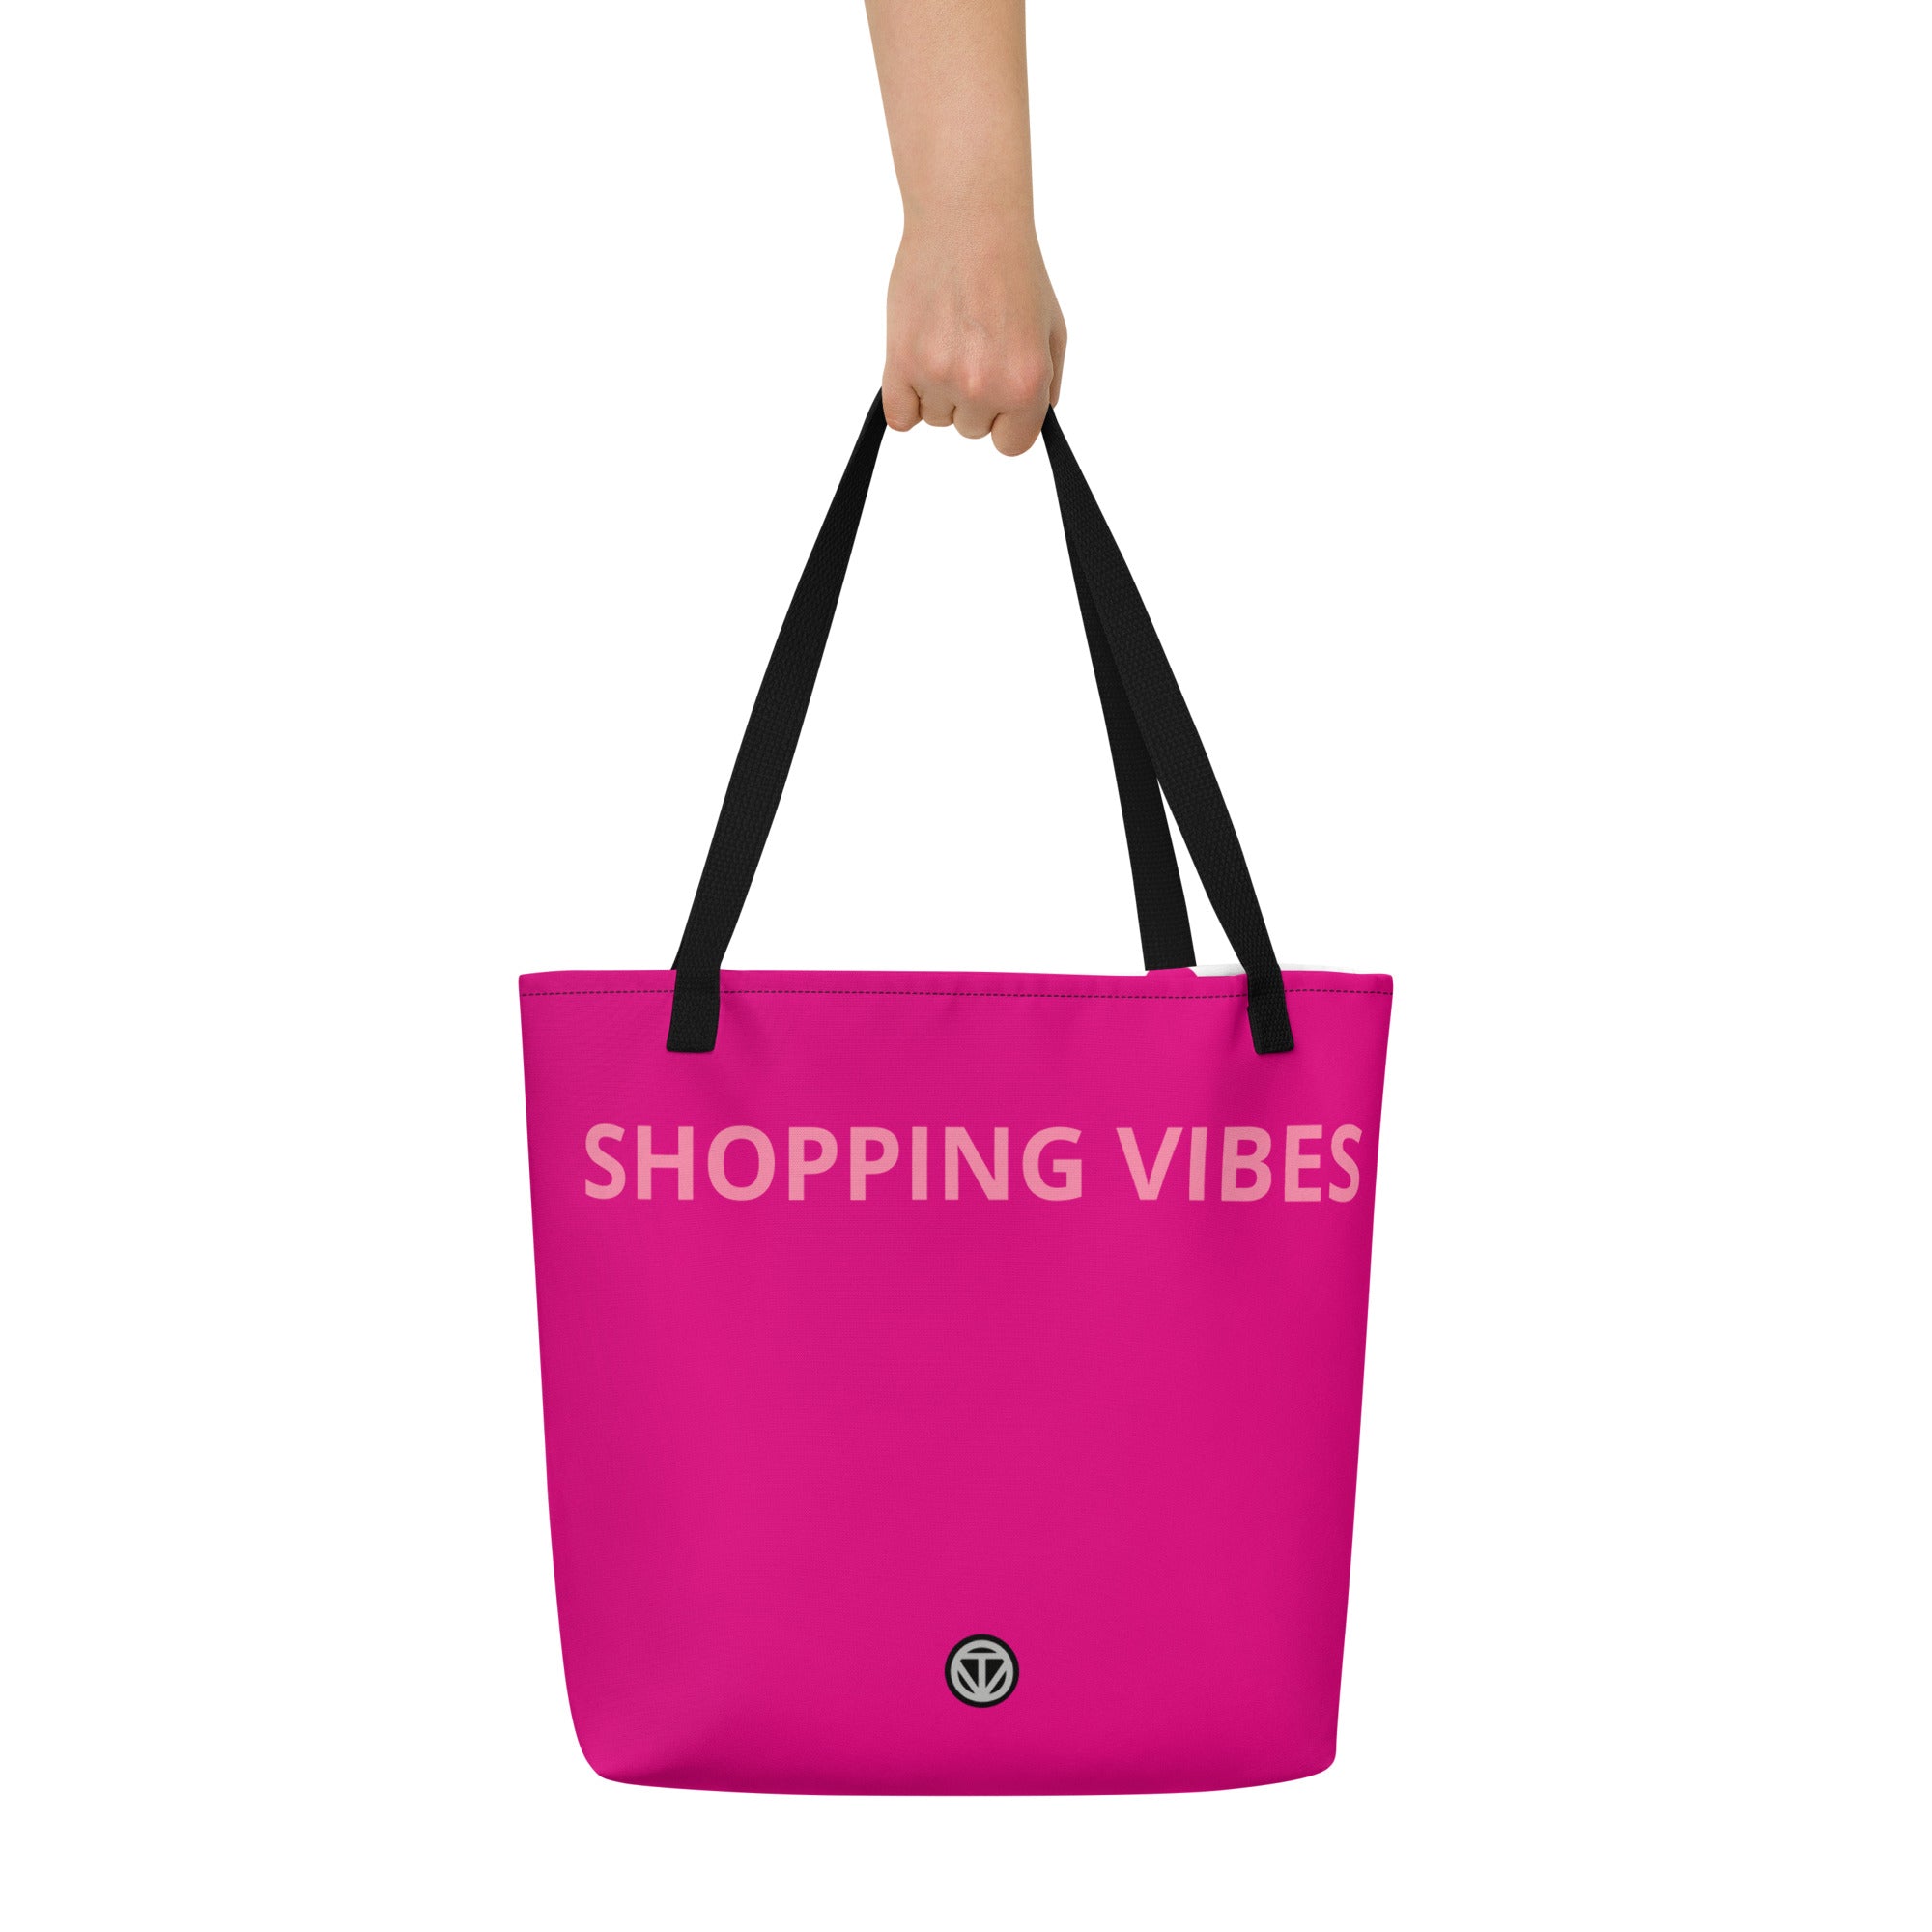 TIME OF VIBES TOV Tragetasche SHOPPING (Pink) - €45,00